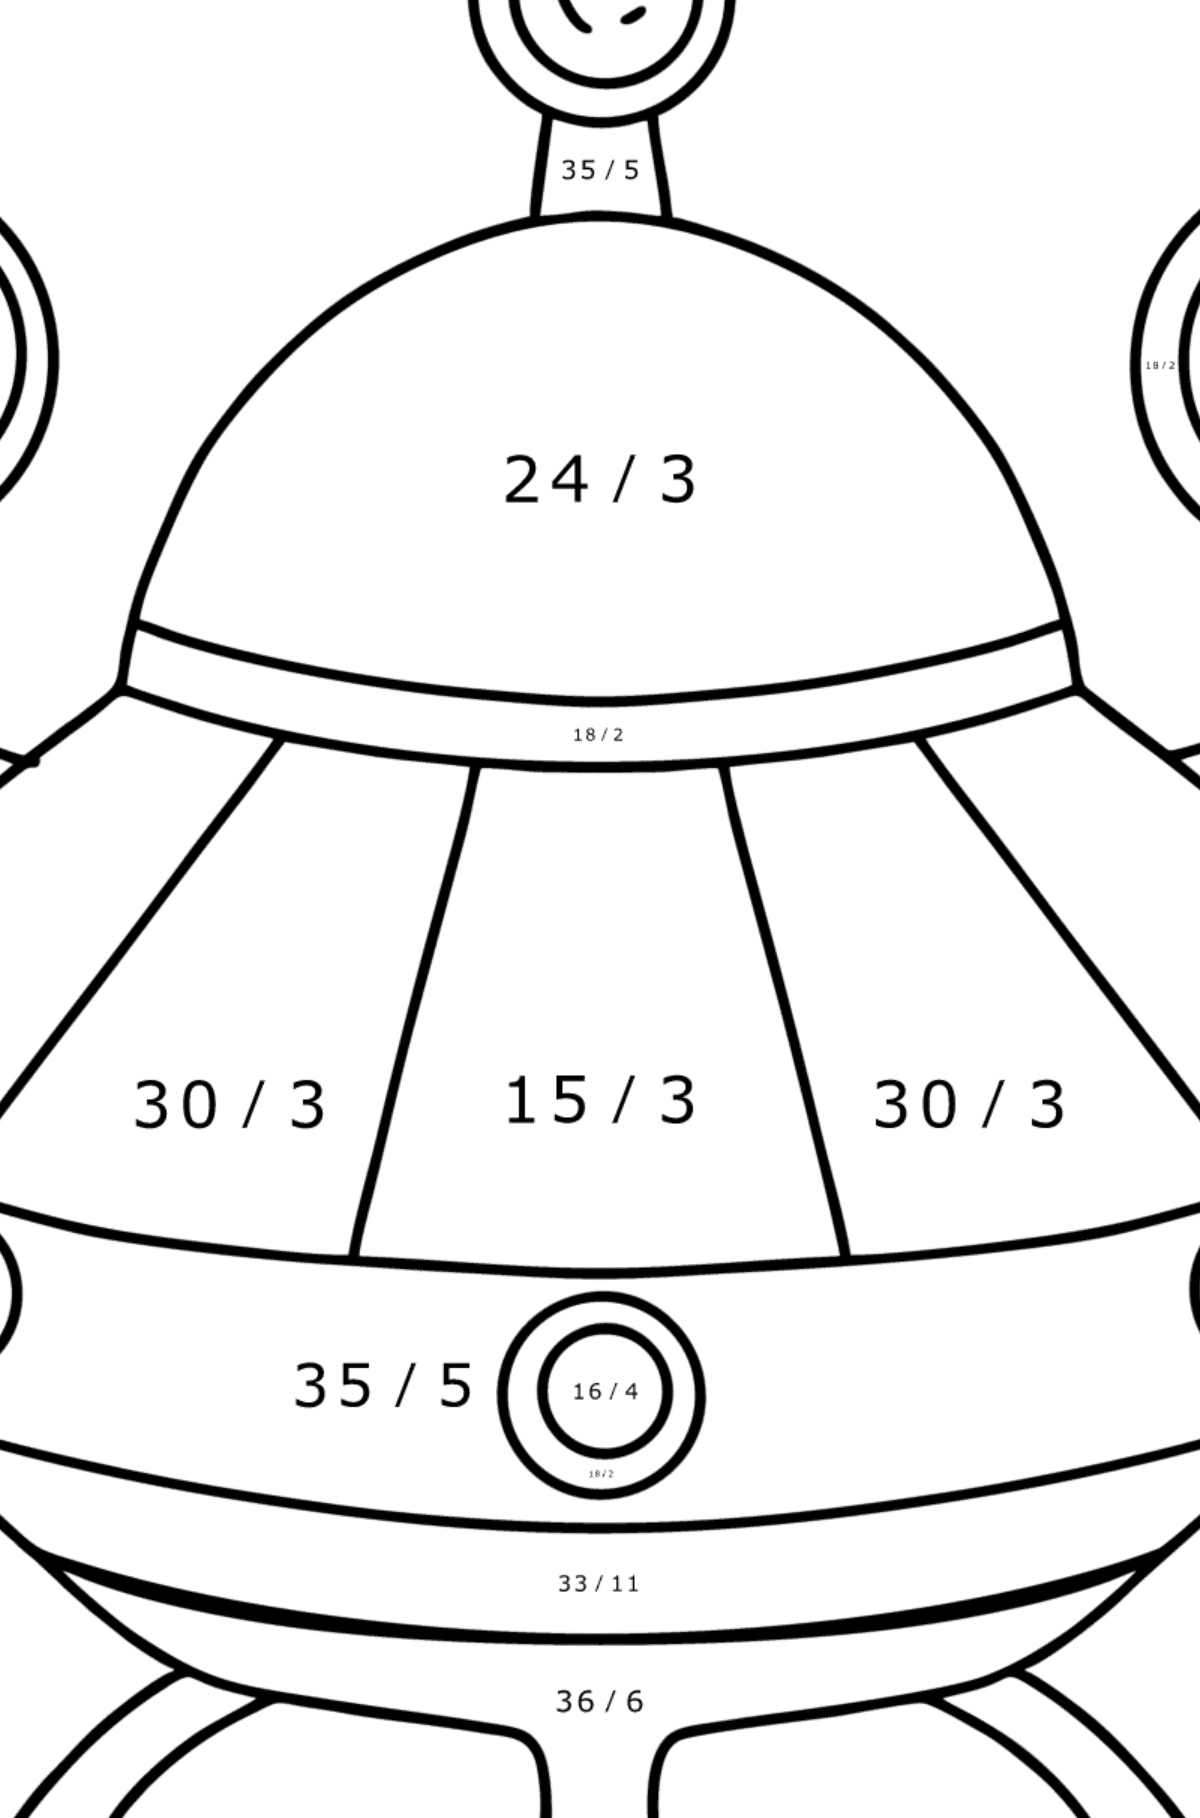 Alien spaceship coloring pages - Math Coloring - Division for Kids